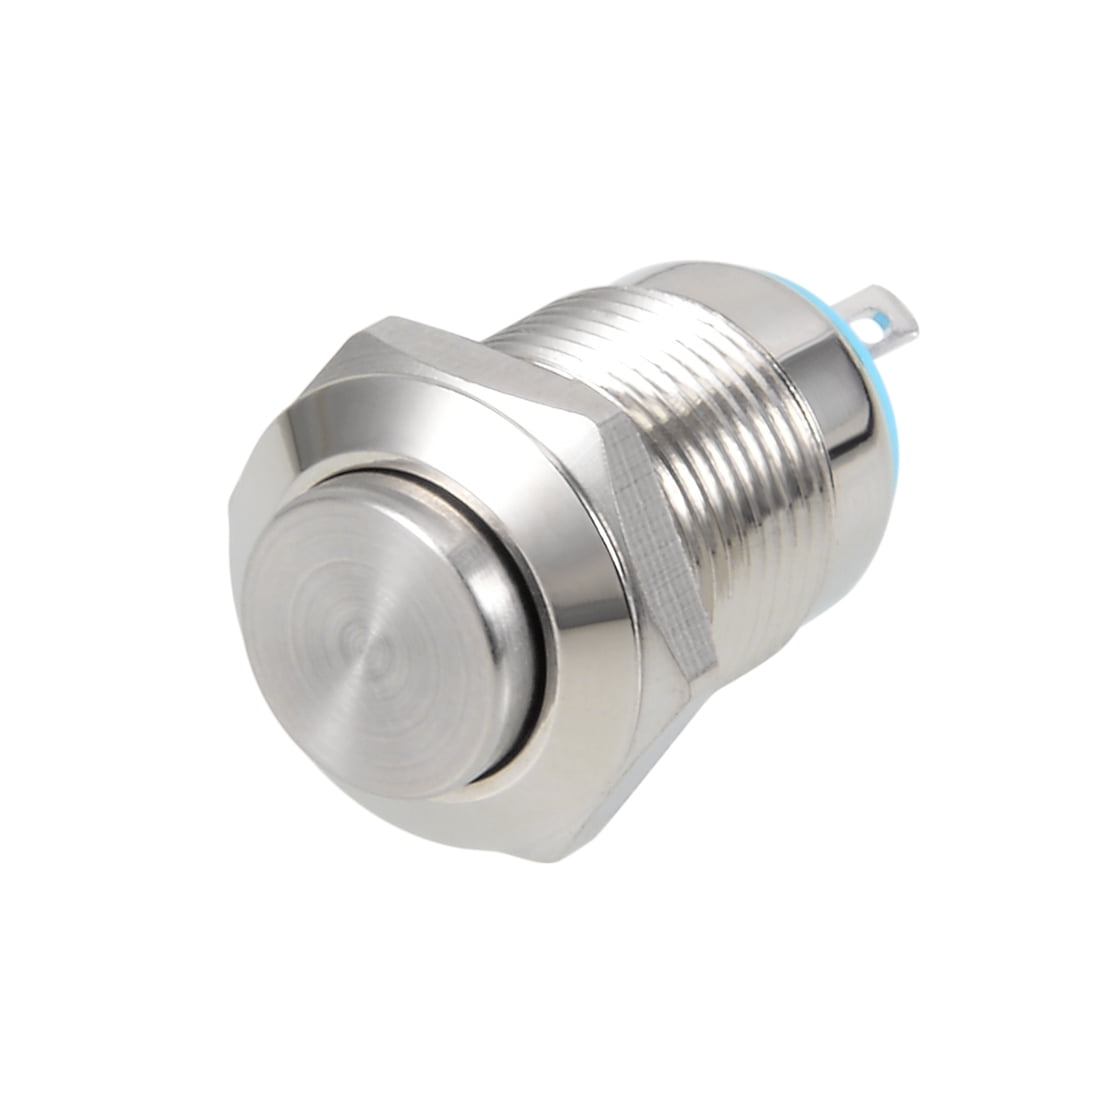 16mm Waterproof Momentary Action Metal Push Button Switch SPST Raised Flat Head 